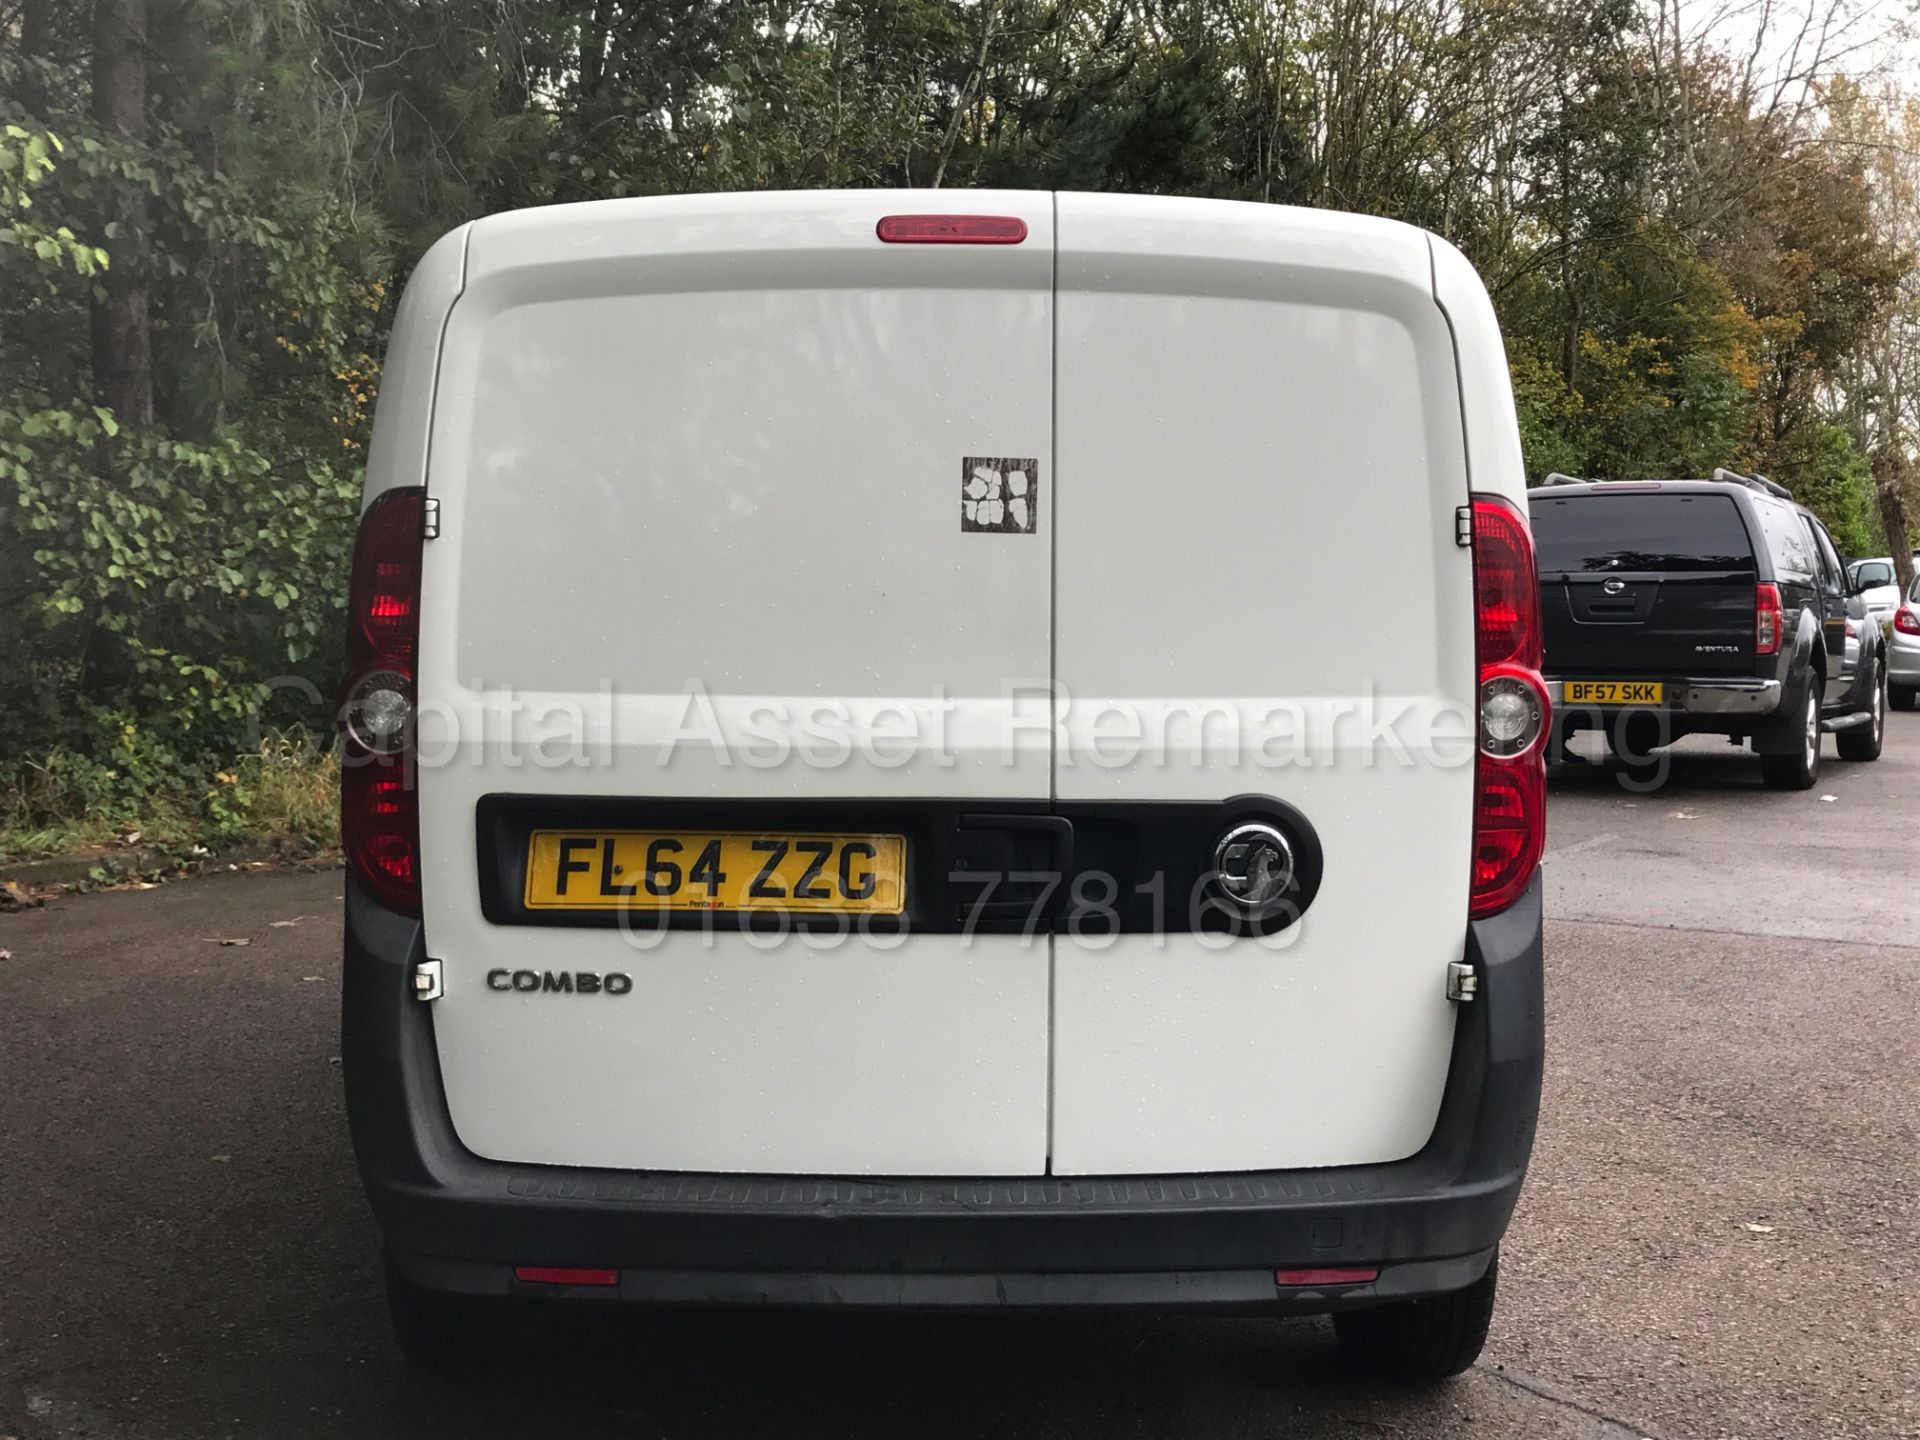 VAUXHALL COMBO 2000 L1H1 (2015 MODEL) 'CDTI - 90 BHP' (1 FORMER COMPANY OWNER FROM NEW) *50 MPG+* - Image 7 of 25